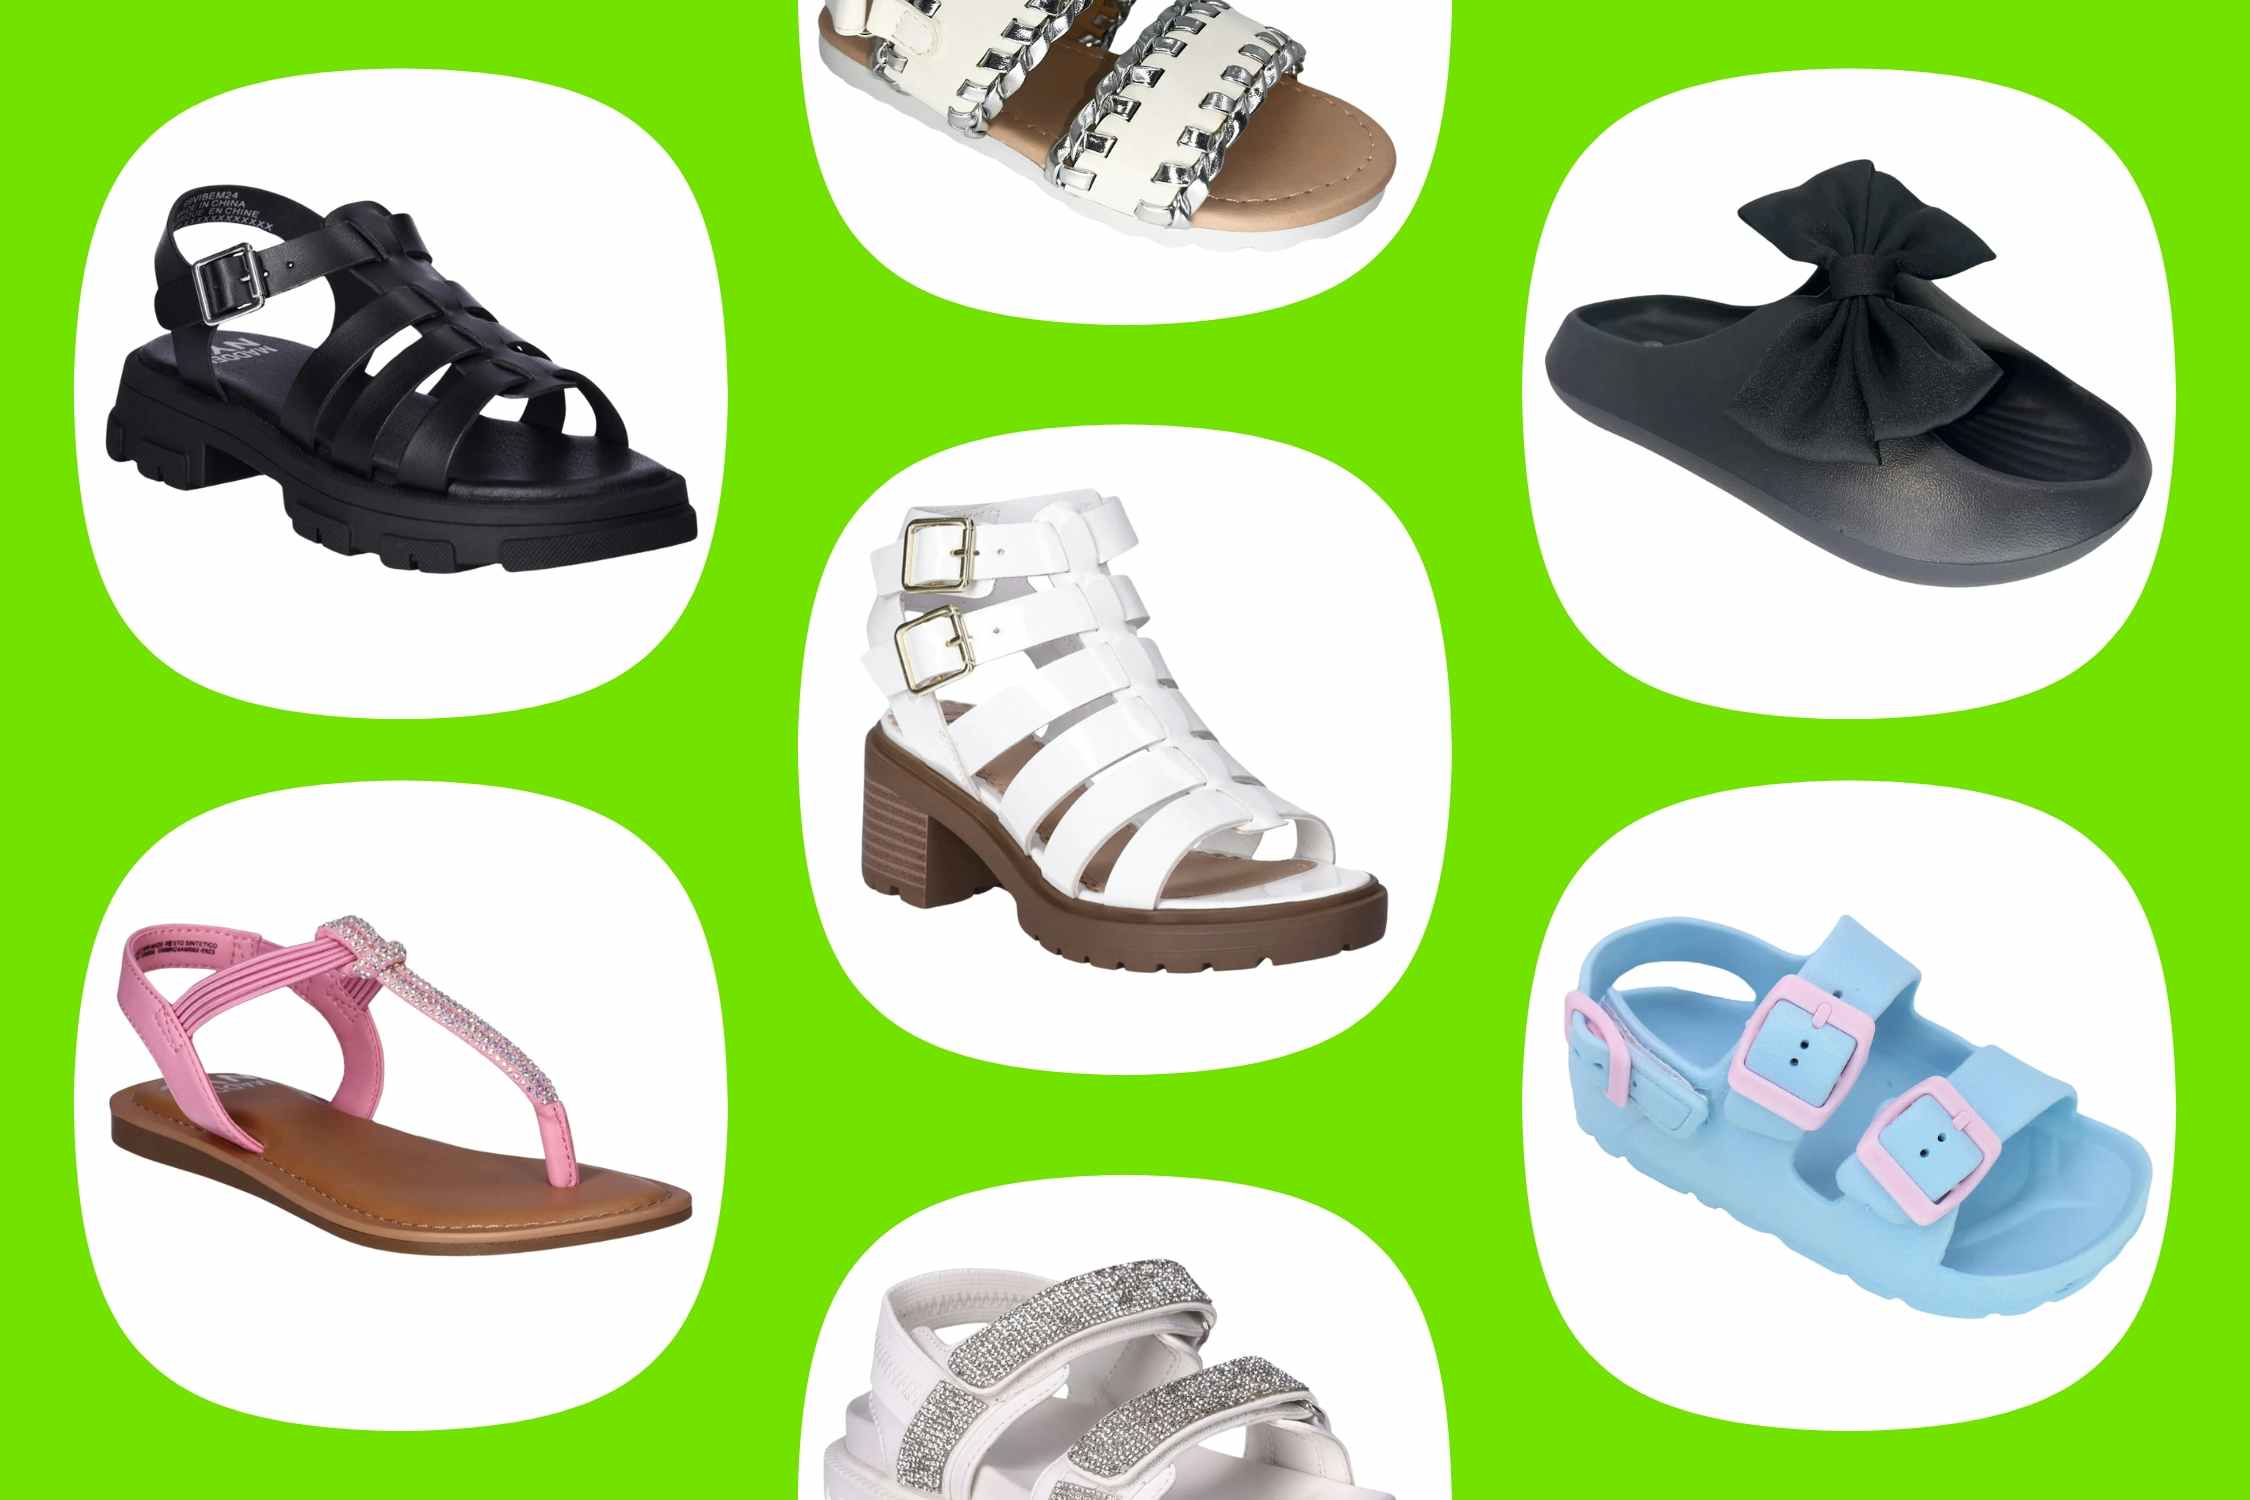 Sandal Deals for Toddlers and Kids: Prices Starting at Only $6 at Walmart